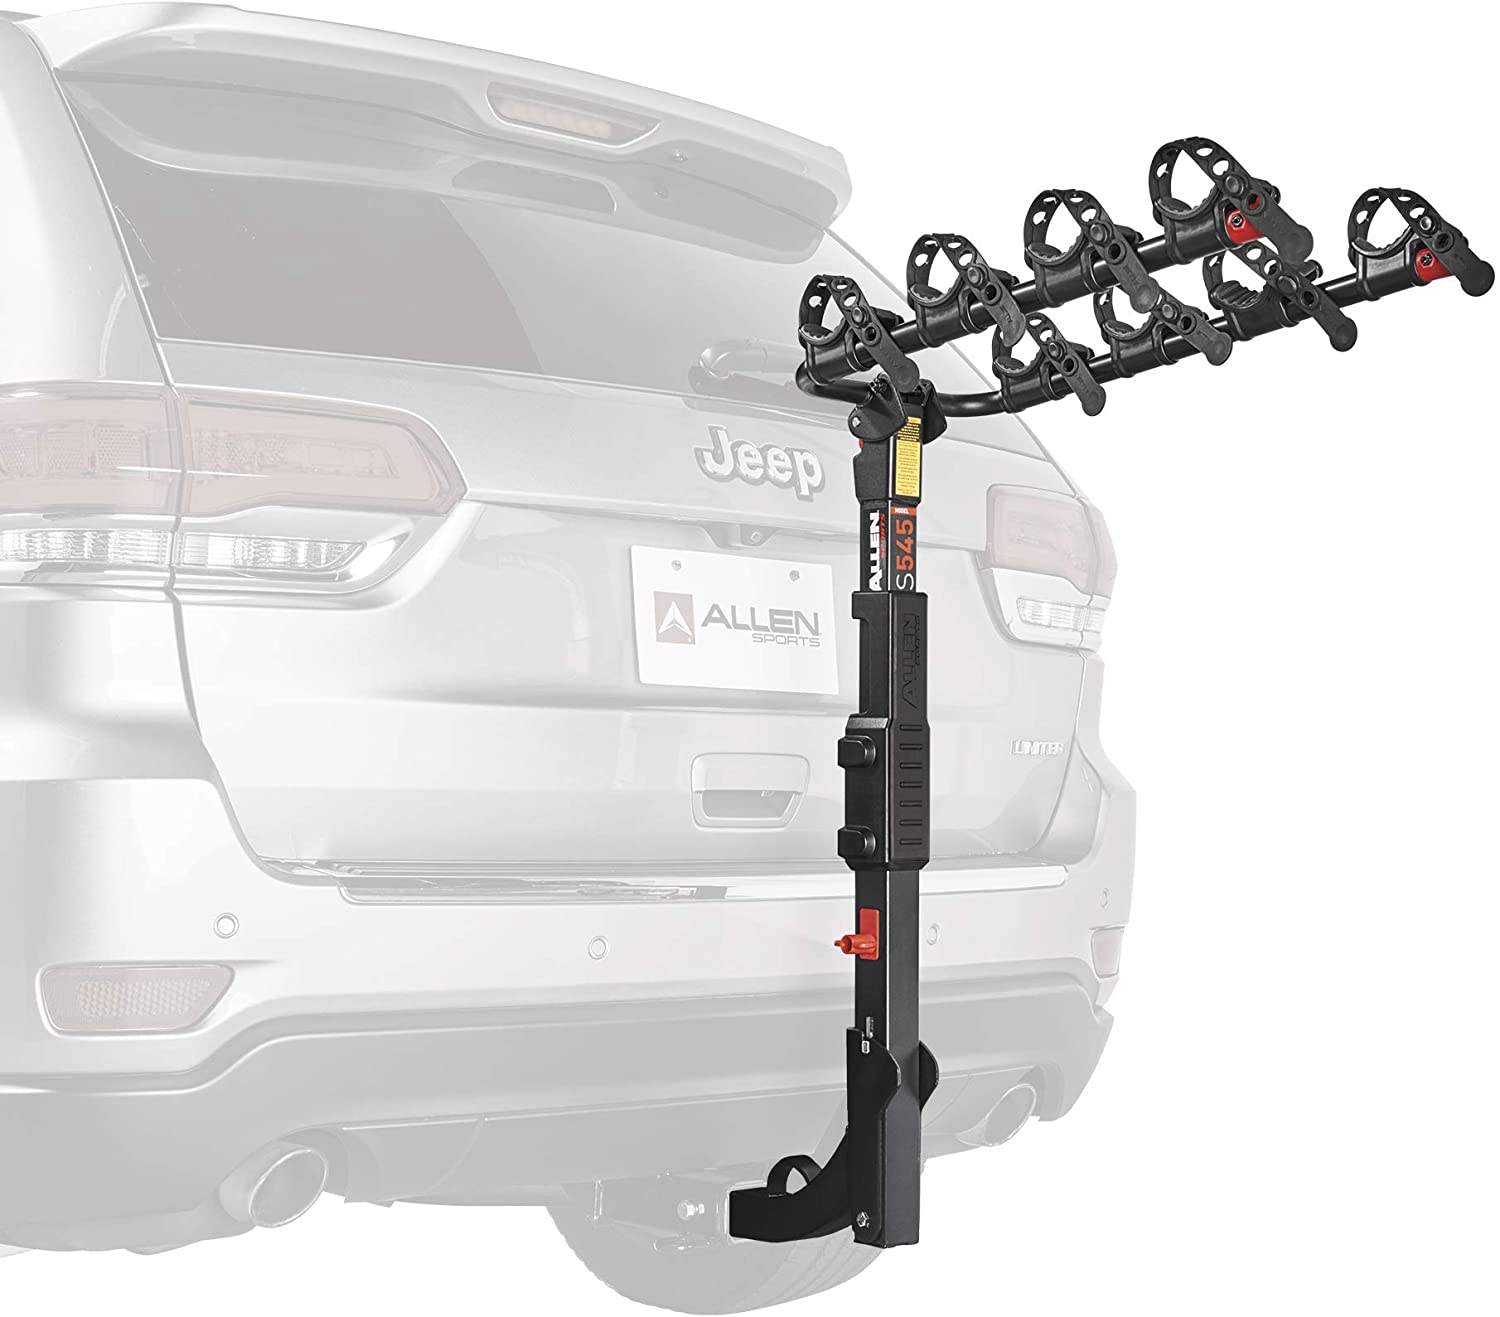 Allen Sports Premier 4-Bike Hitch Rack for 2" Hitch (S545) $96 + free shipping